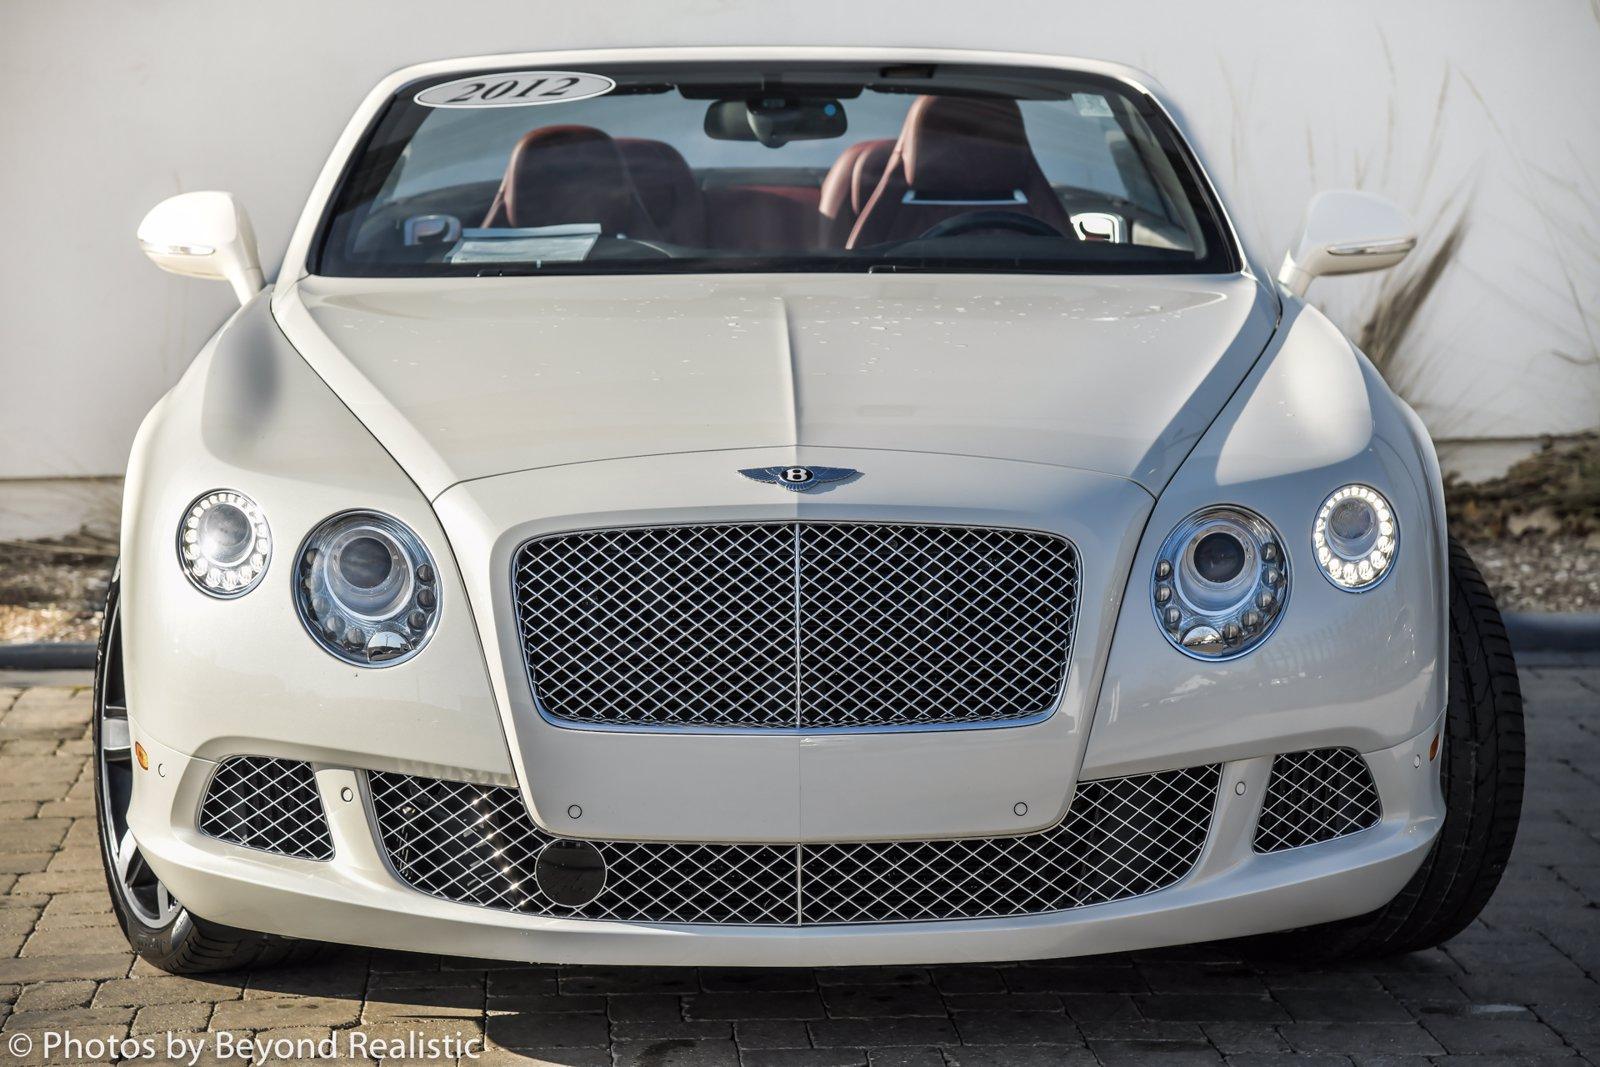 Used 2012 Bentley Continental GT Mulliner Convertible | Downers Grove, IL